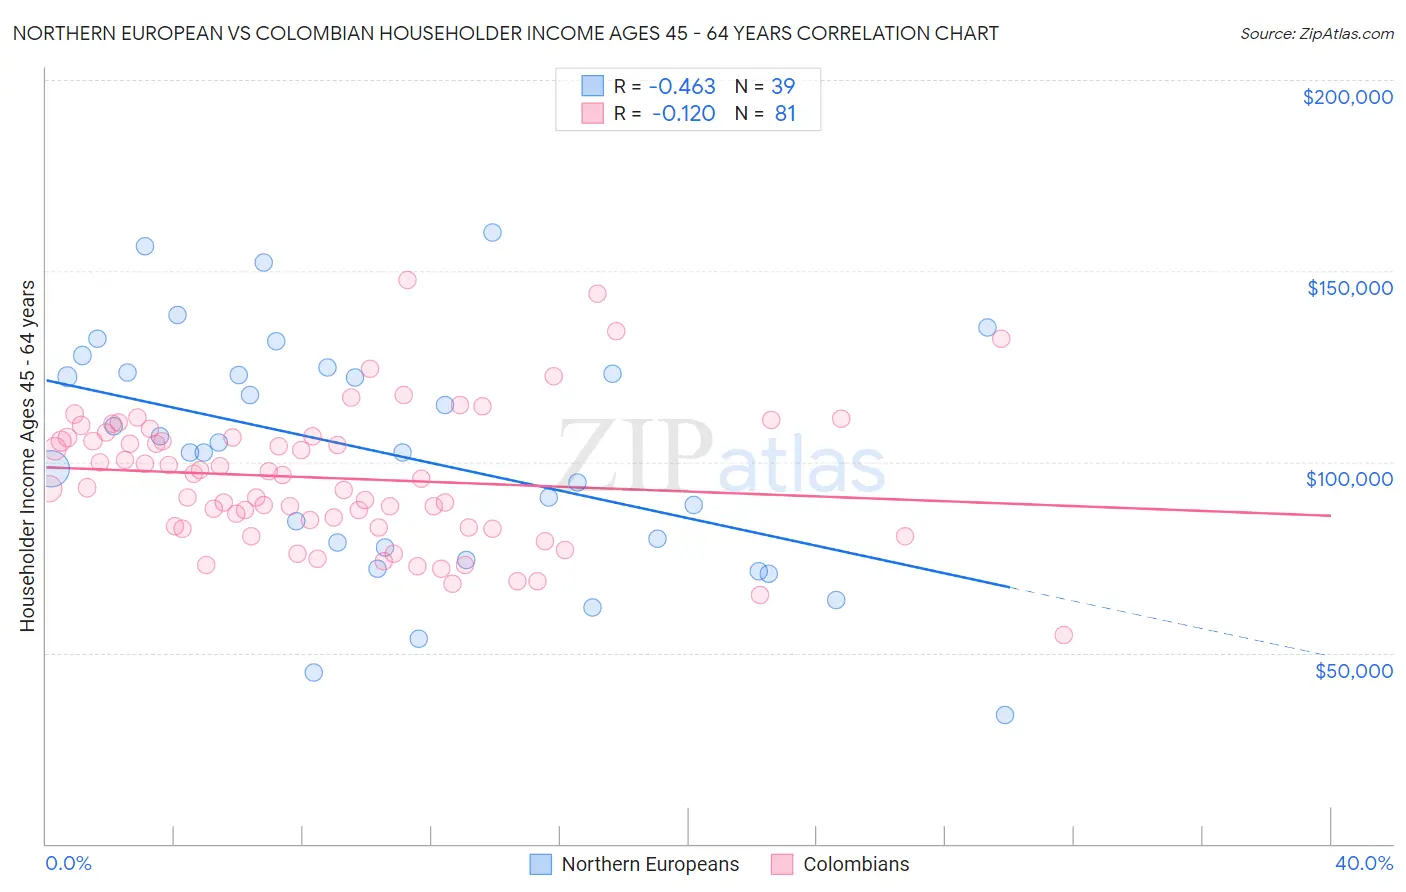 Northern European vs Colombian Householder Income Ages 45 - 64 years